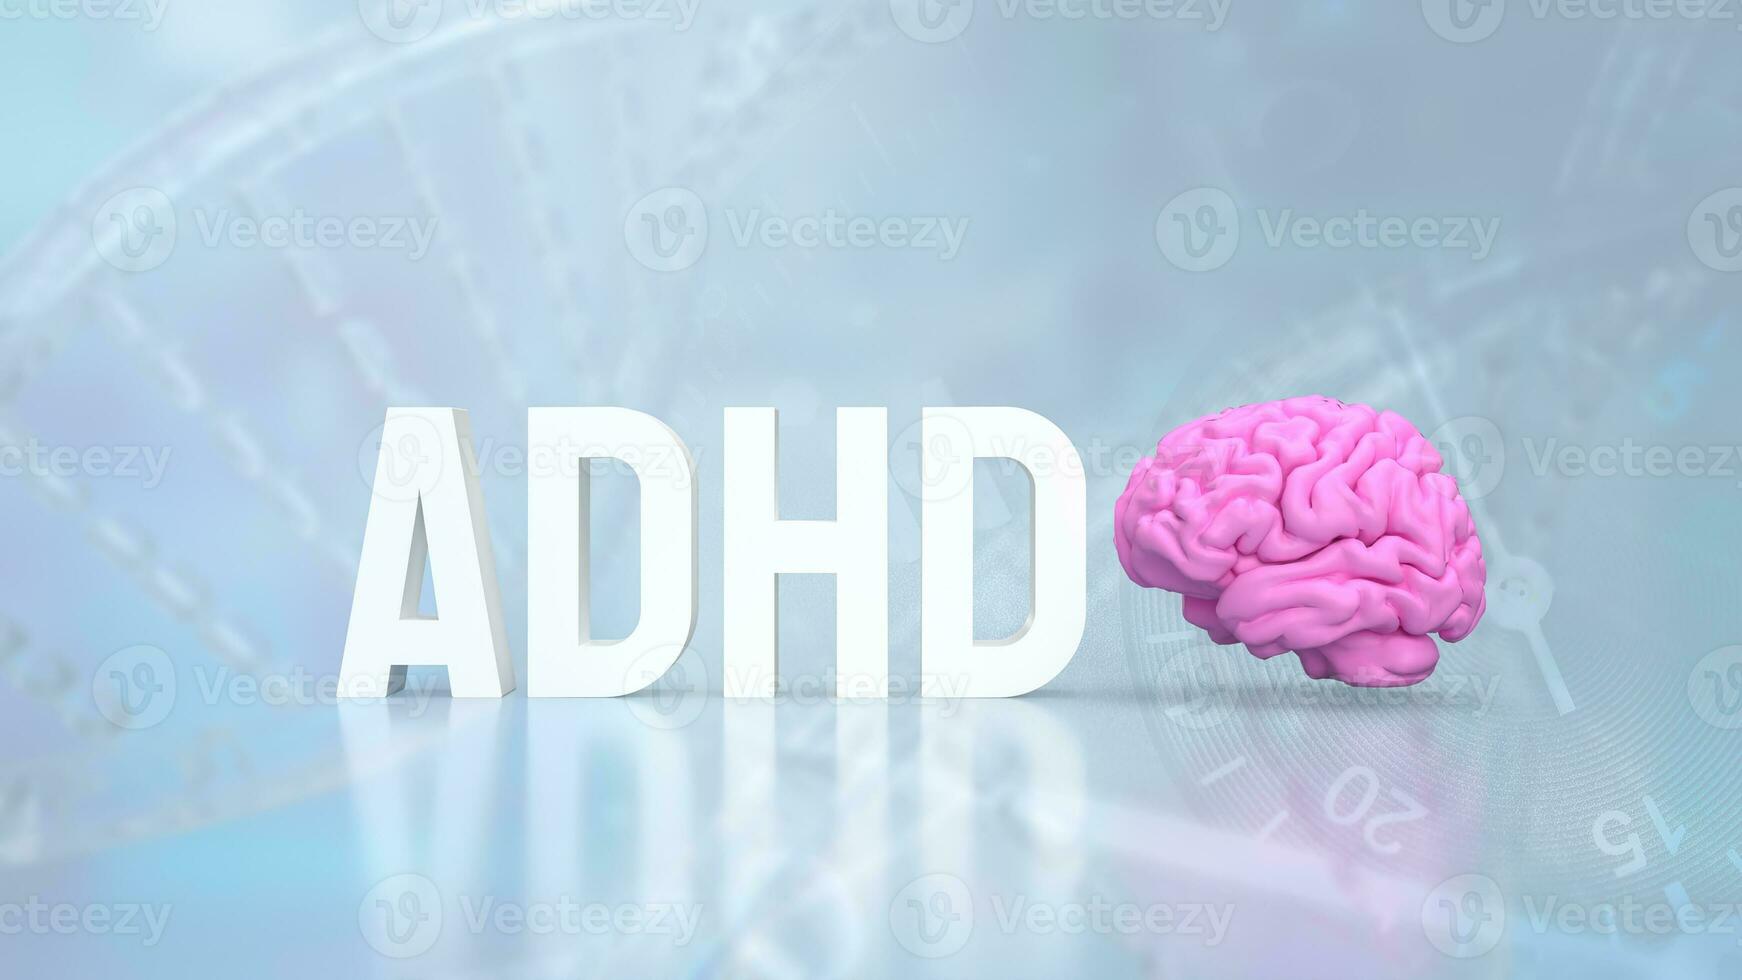 The ADHD for medical or education concept 3d rendering. photo